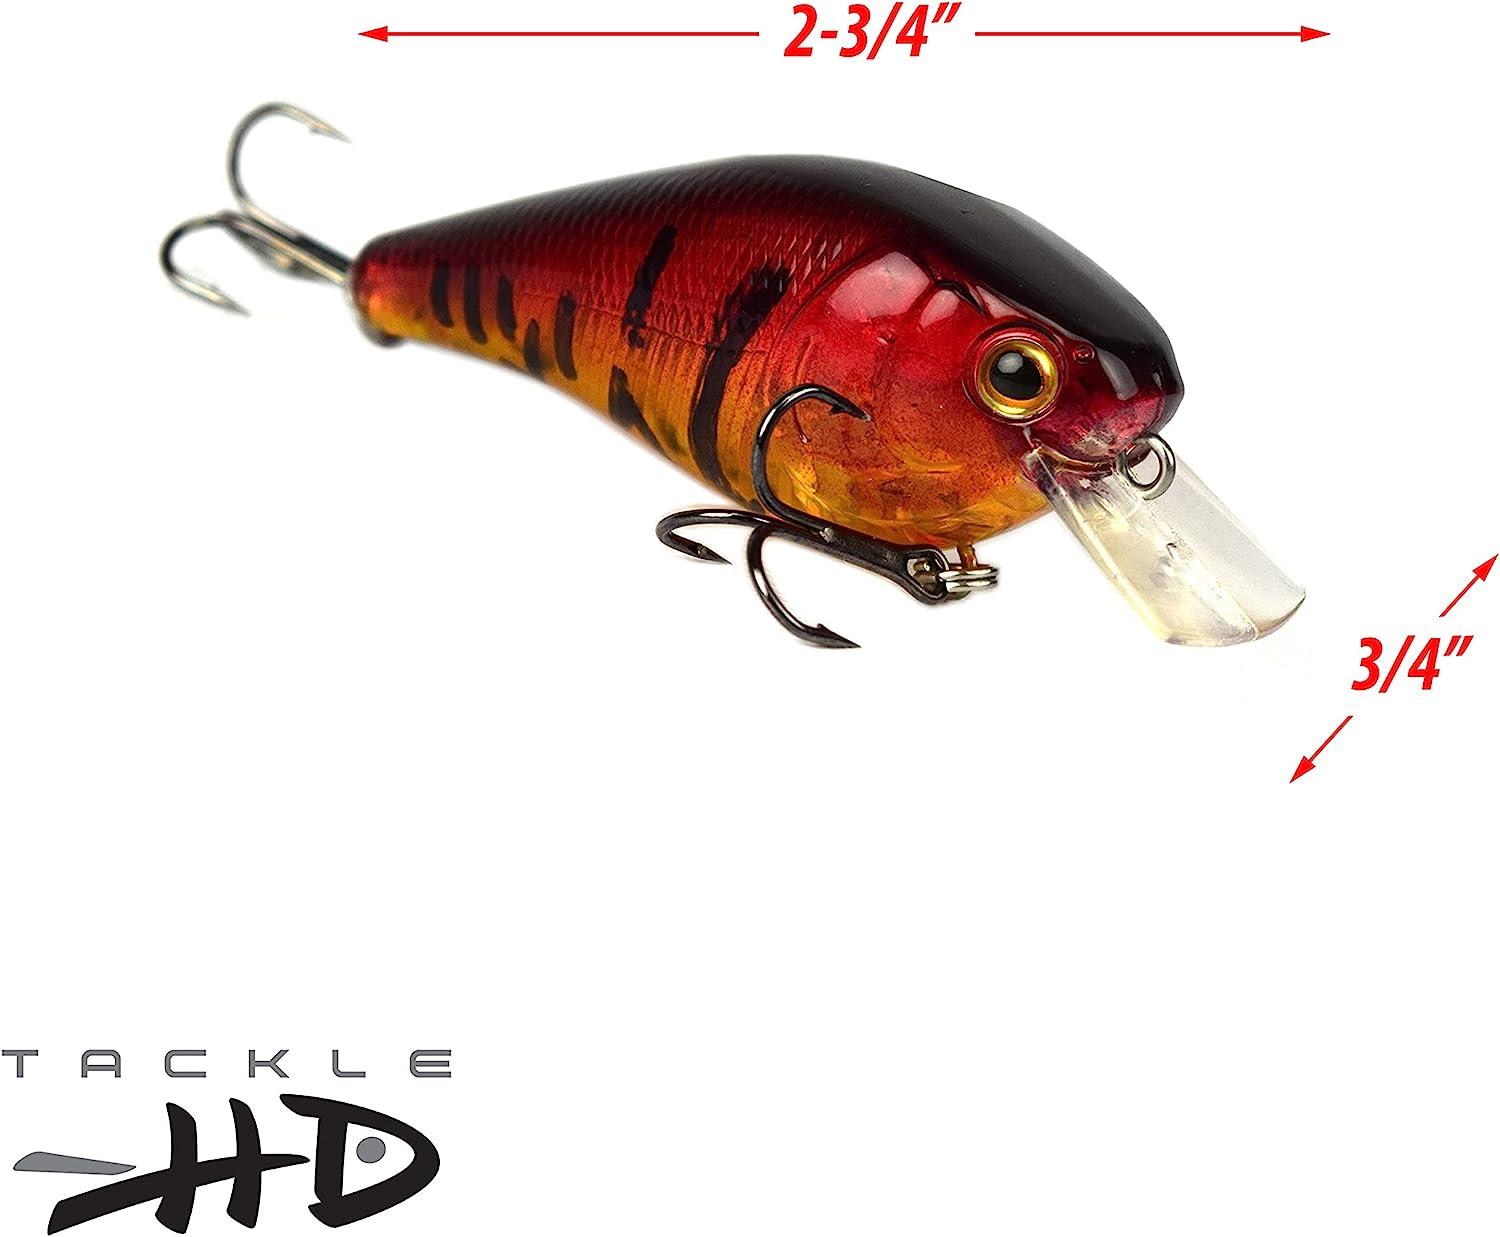 2-Pack Lipped Crankbait, Fishing Bait with 9 to 14 Feet Depth, Fishing  Lures for Freshwater or Saltwater, Hard Swimbaits for Bass, Crappie, or  Walleye